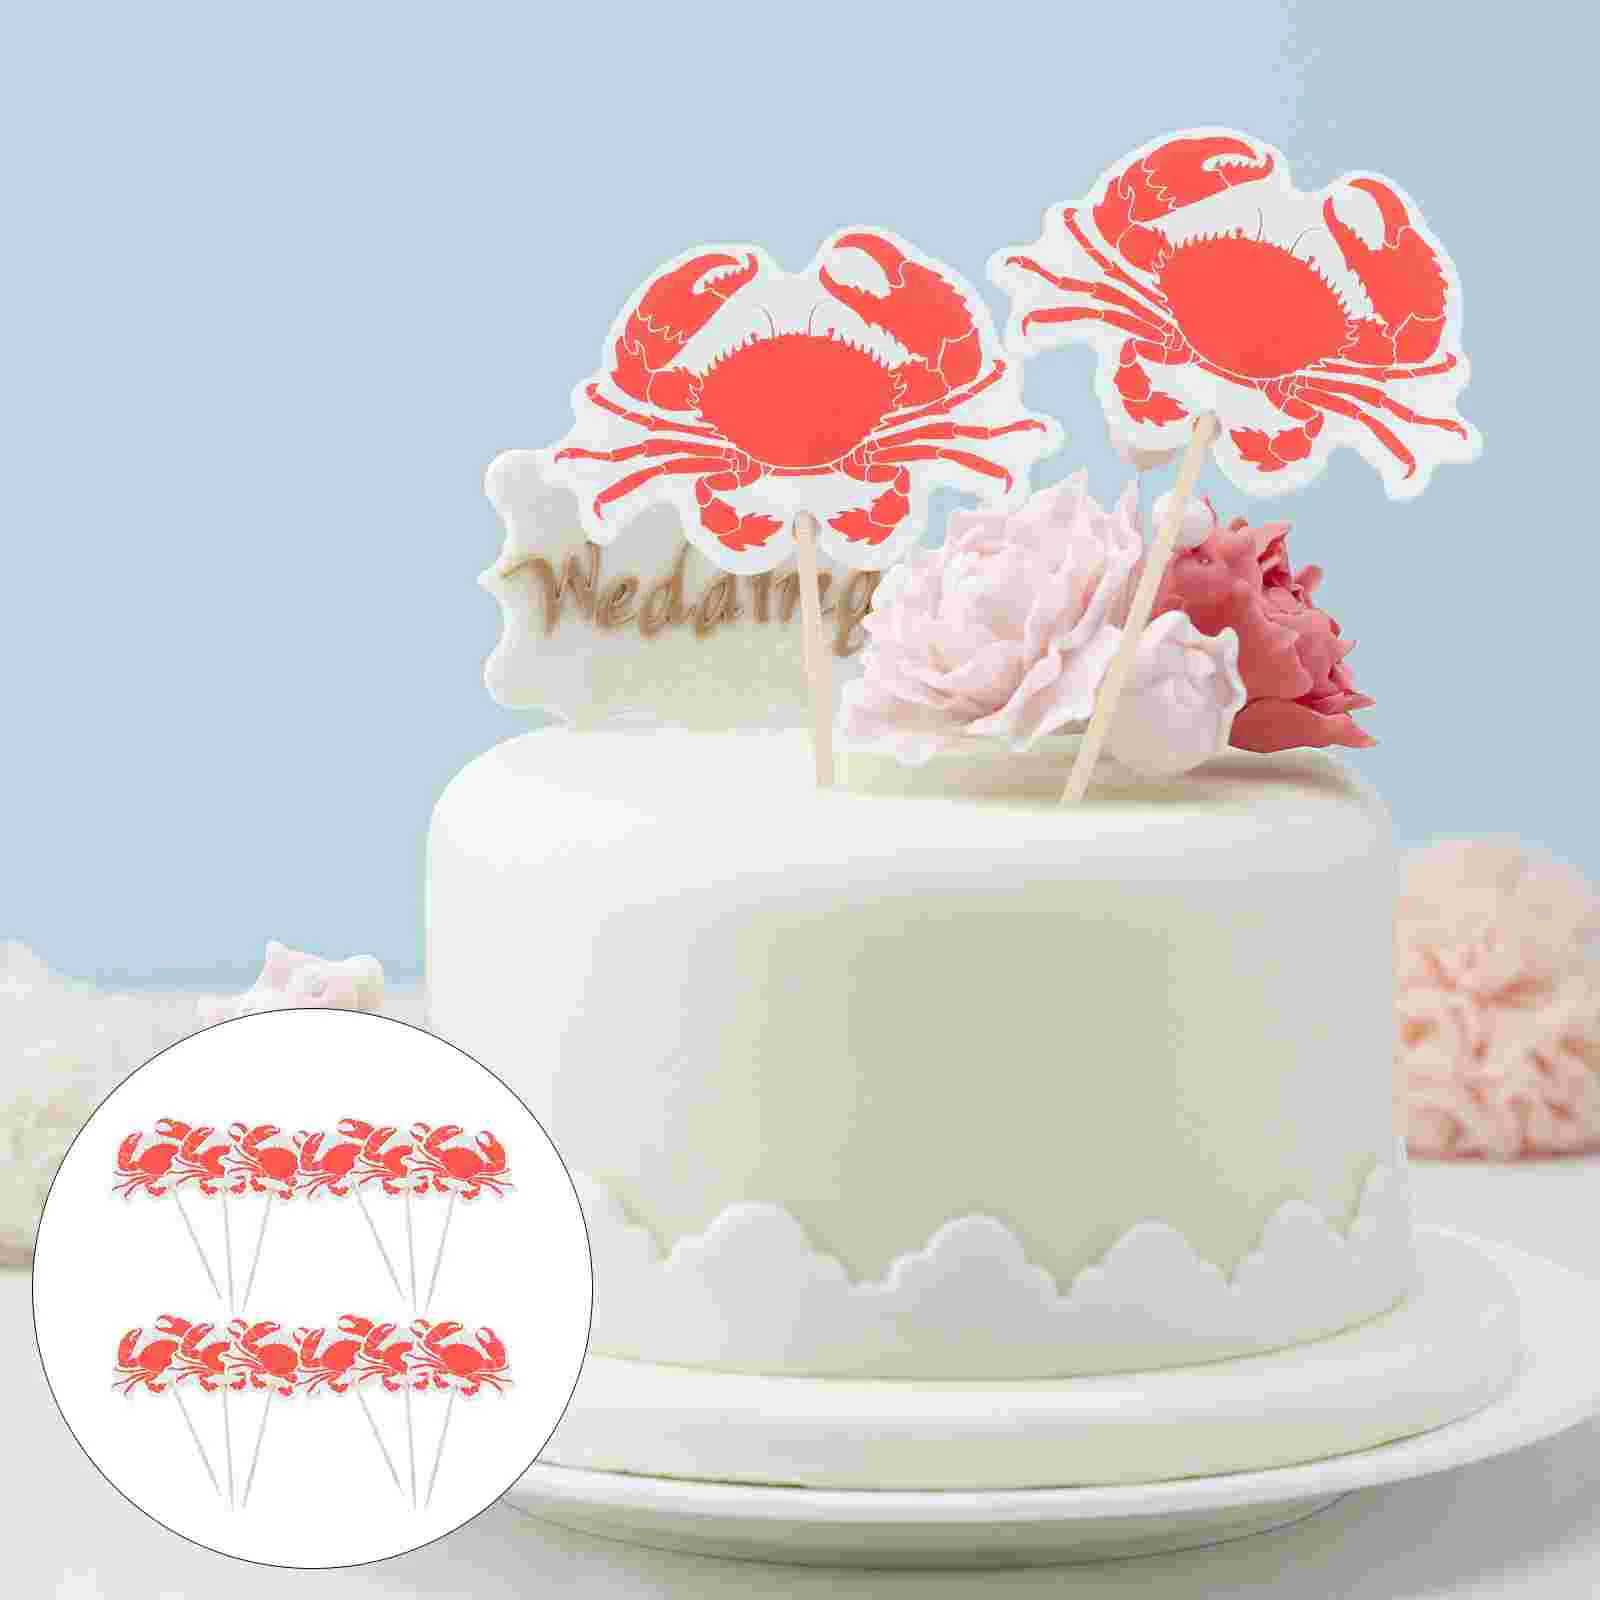 

24pcs Big Red Crab Birthday Cake Topper Fruit Picks Dessert Table Decorative Supplies for Party Festivals